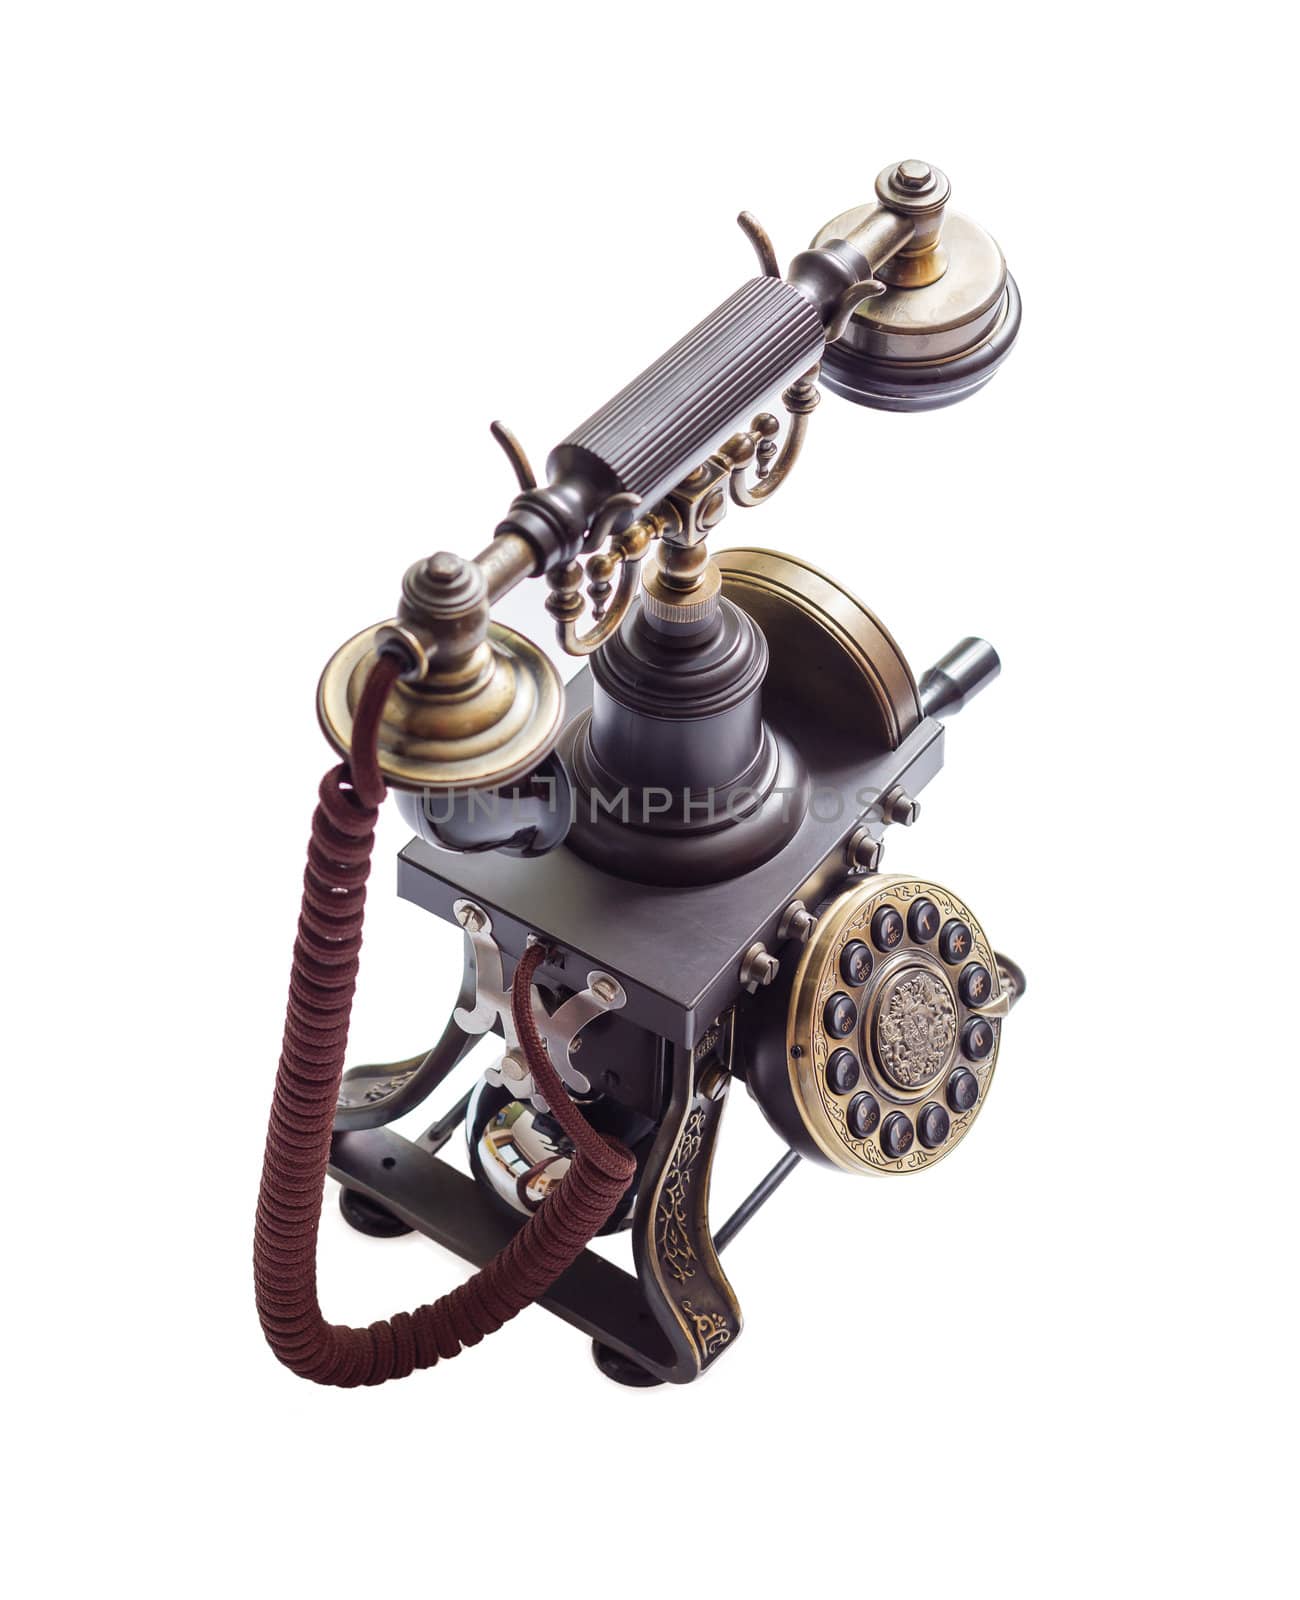 Retro vintage phone isolated  by doble.d